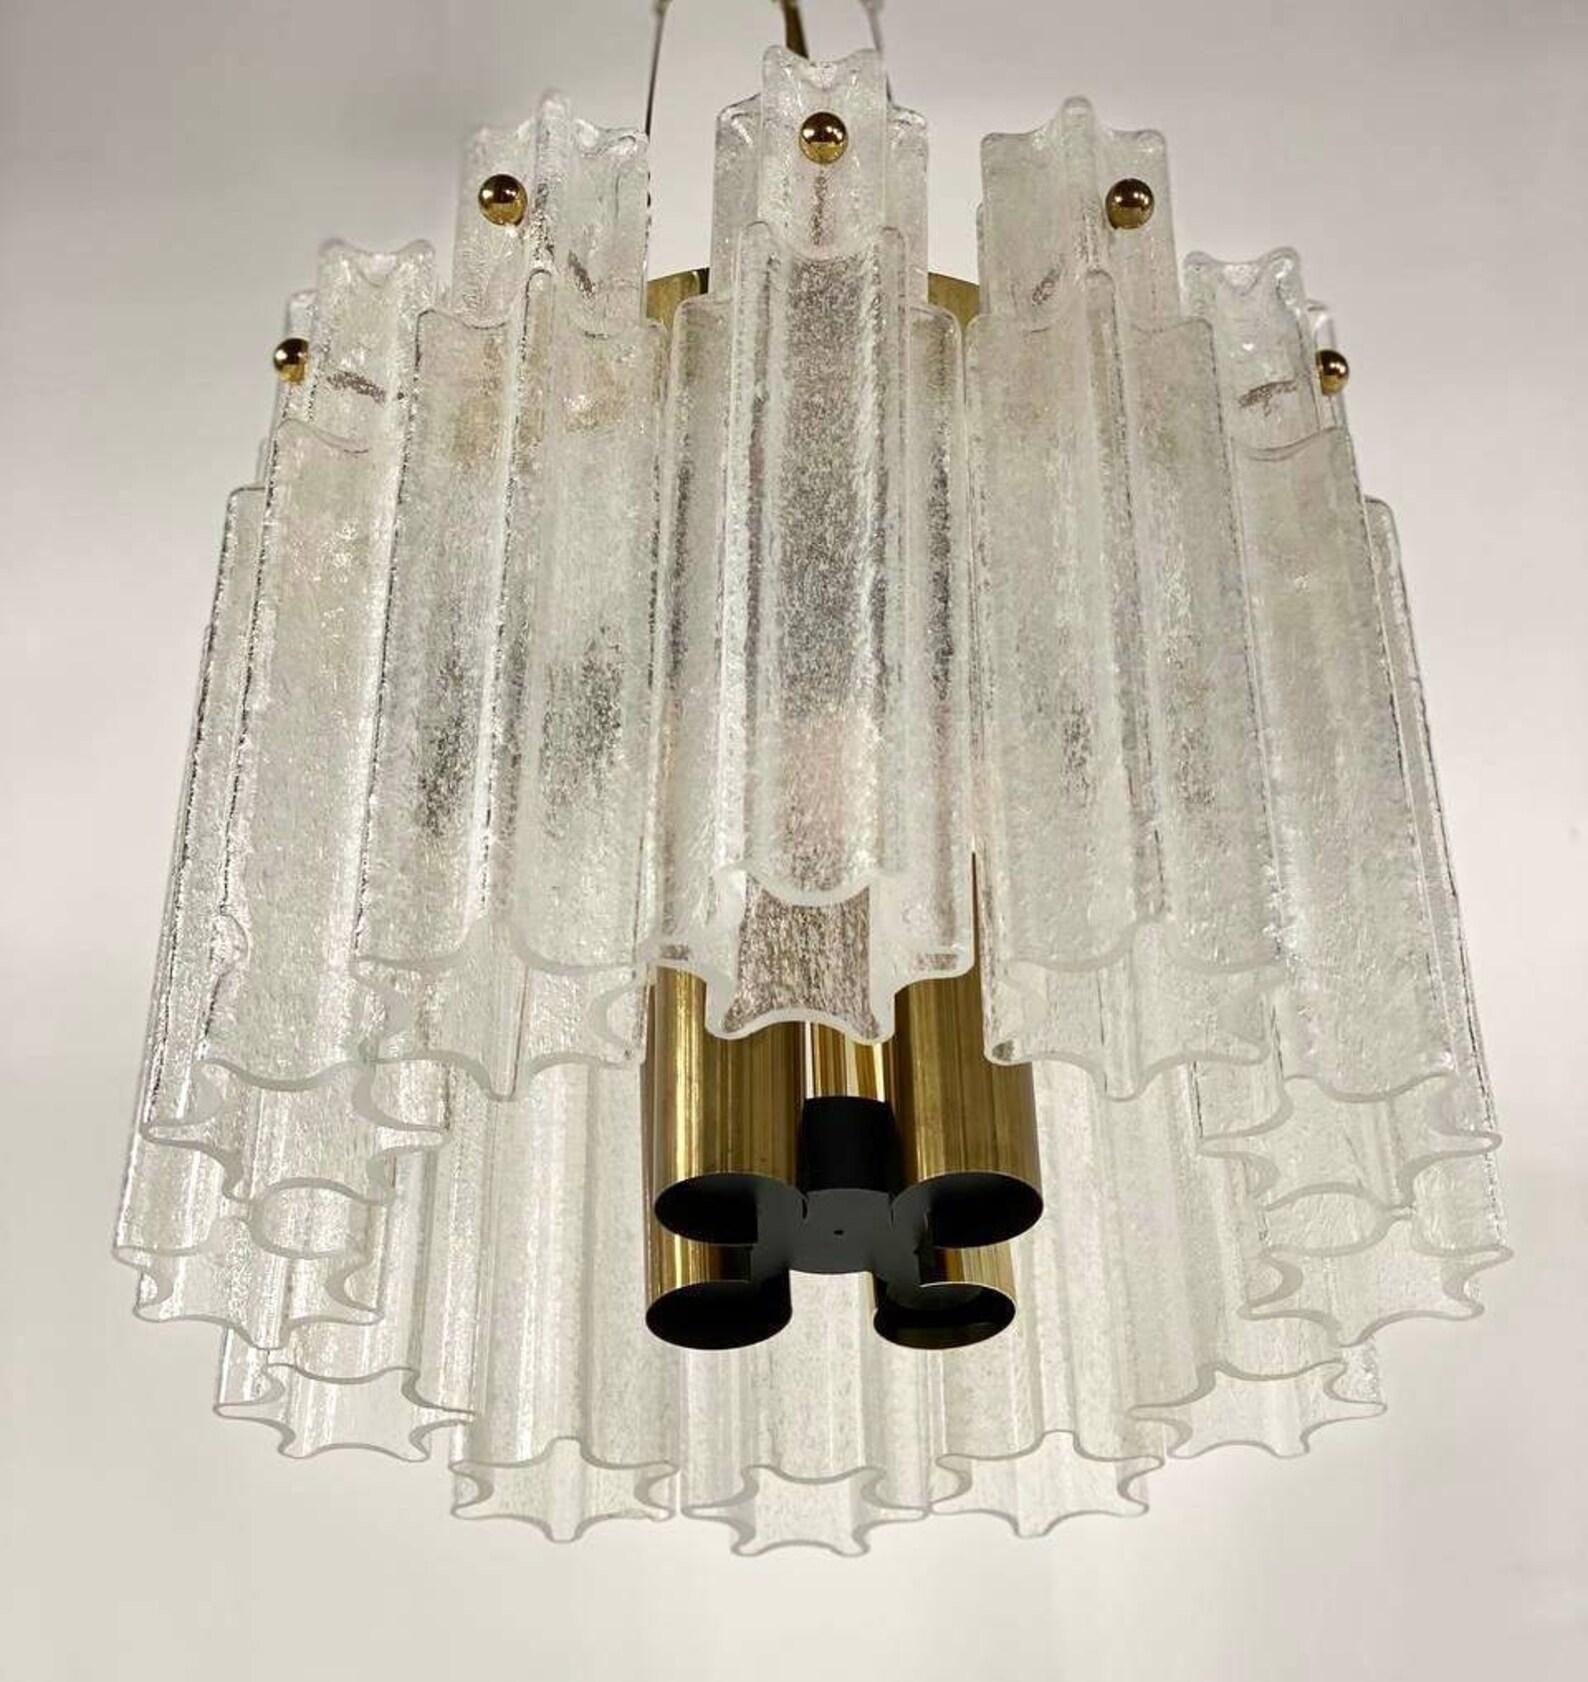 Vintage chandelier from Kalmar Lighting, 1970s. 

A beautiful pendant light, manufactured by Kalmar Austria, in the 1970s.

The suspensions of the luxurious designer chandelier are made of many glass long tubes resembling stars. Grooved hangers,